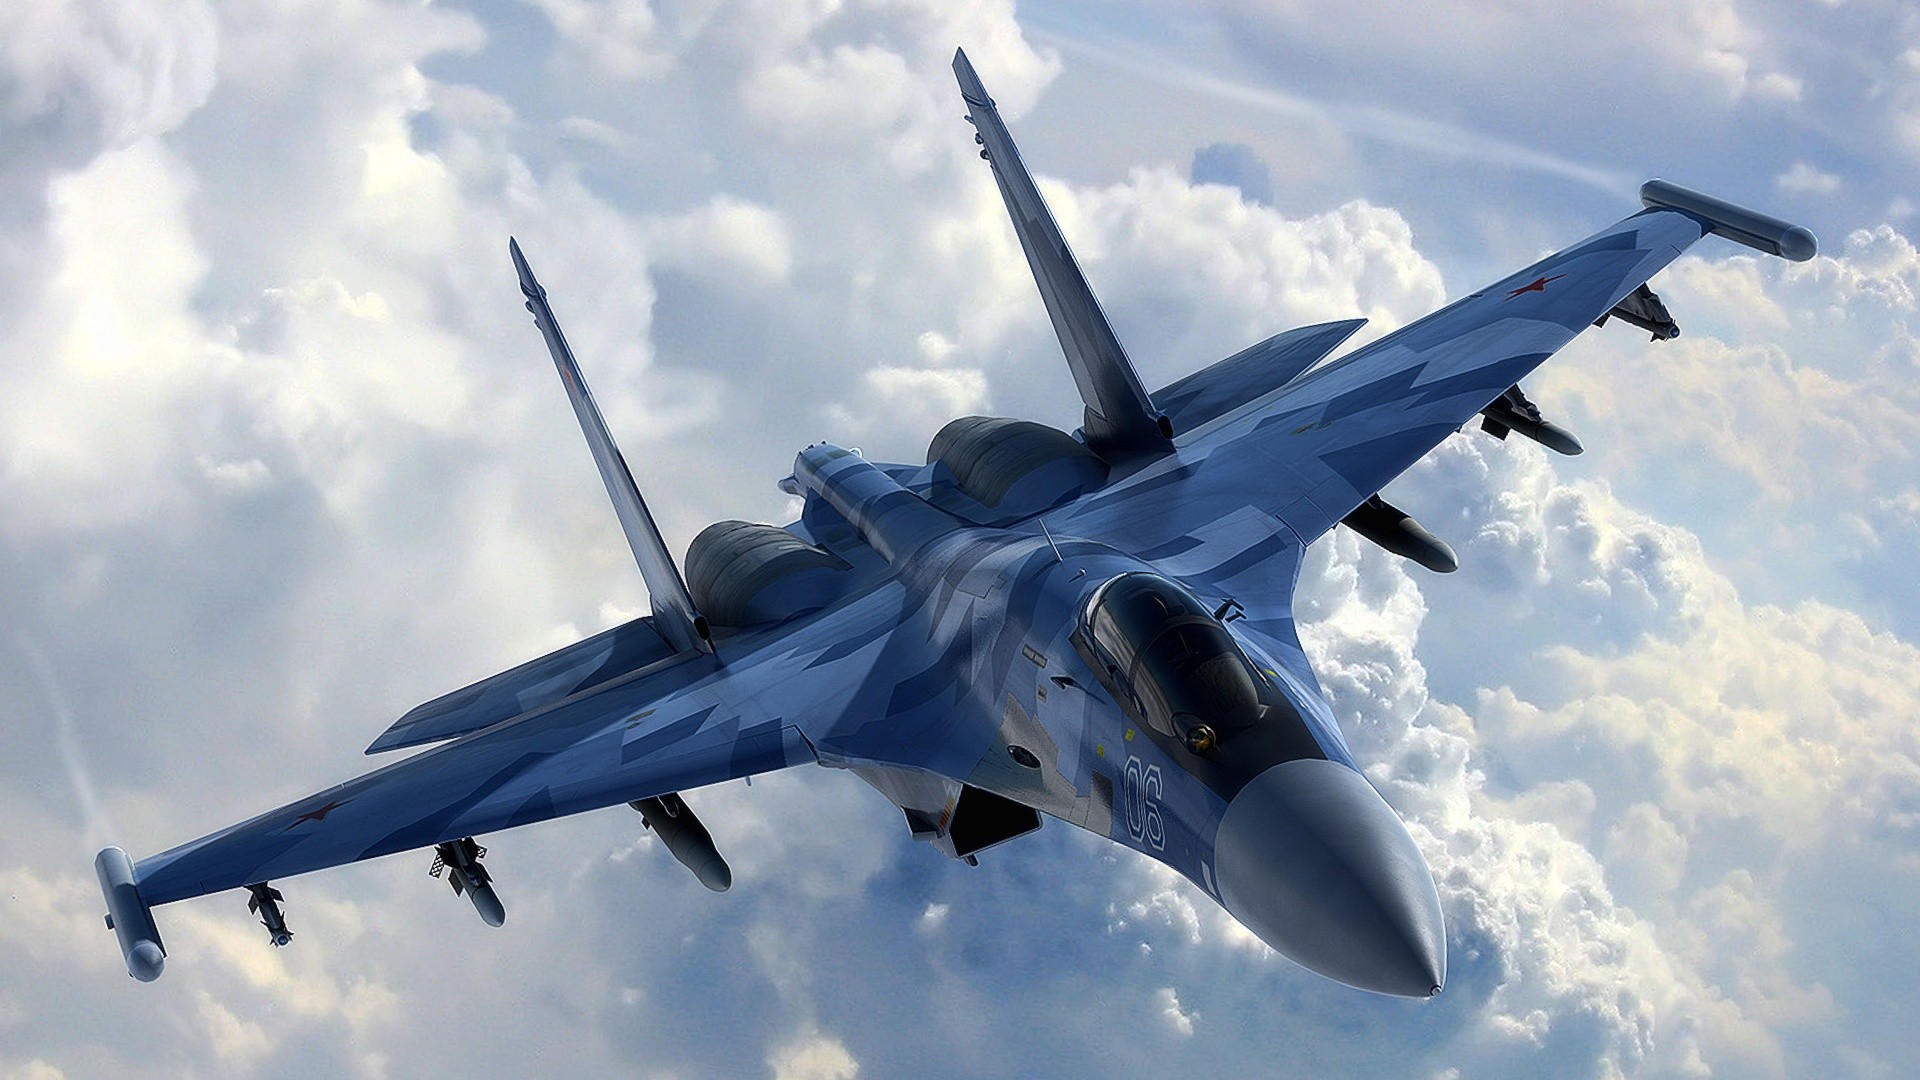 Fighter jet wallpaper pictures